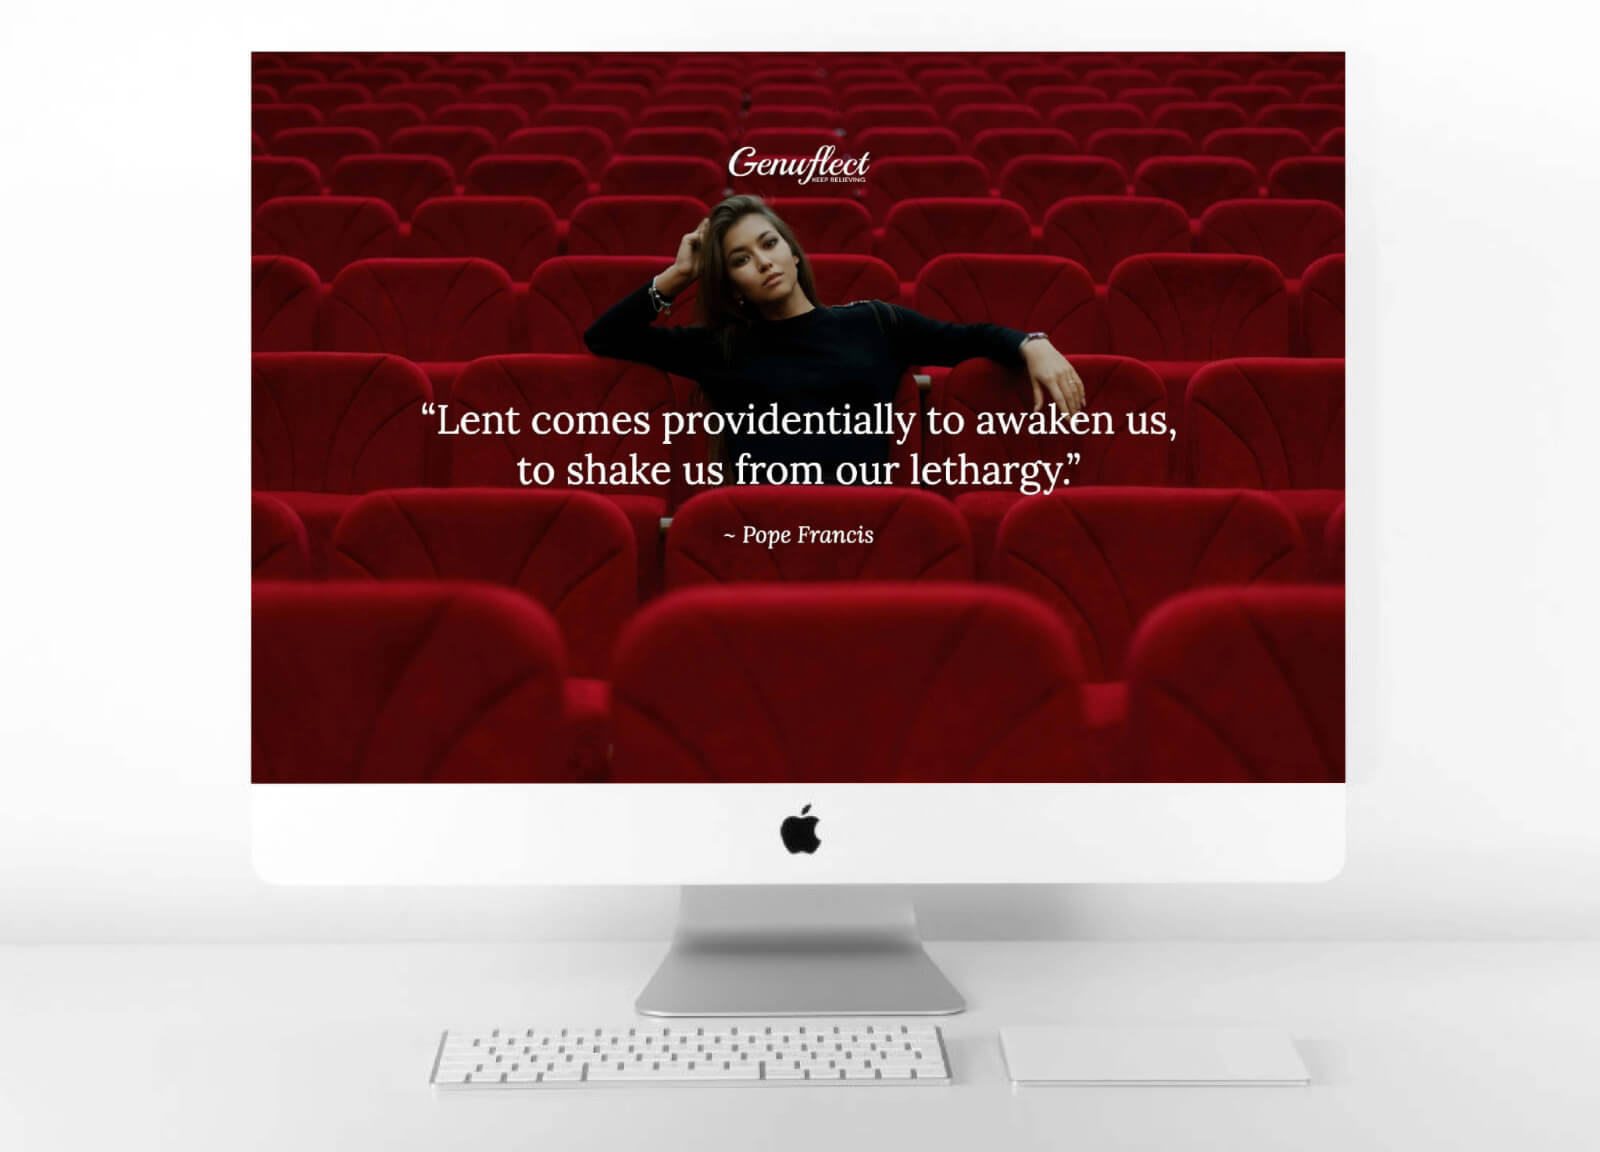 Genuflect computer background image of a Woman sitting alone in a movie theater